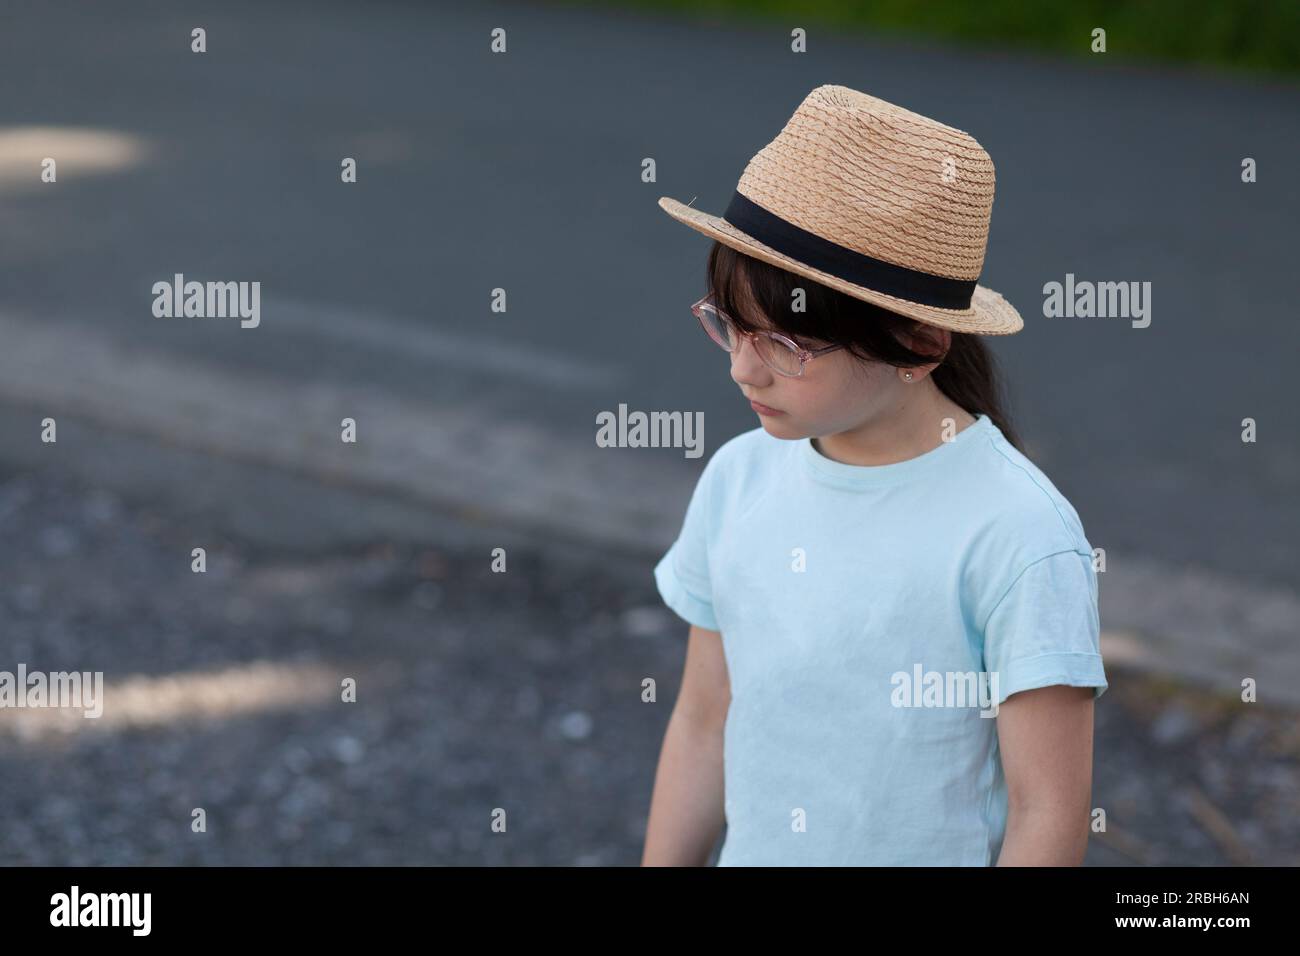 Portrait of little girl wearing straw hat and blue t-shirt Stock Photo